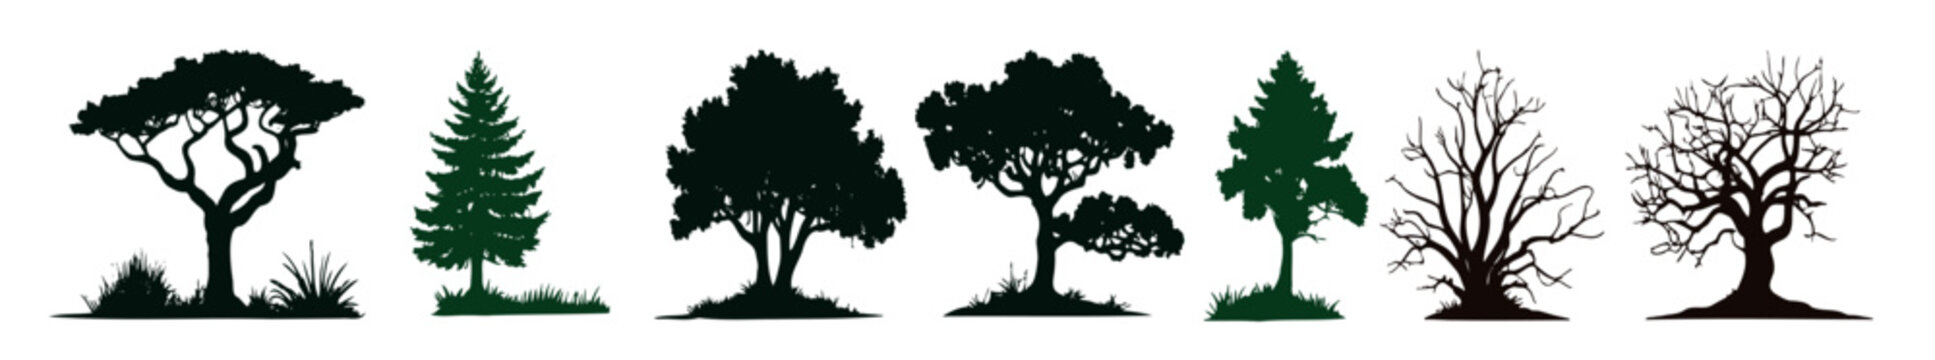 Big collection trees. Ink sketches set isolated on white background. Hand drawn vector illustration. Retro style.